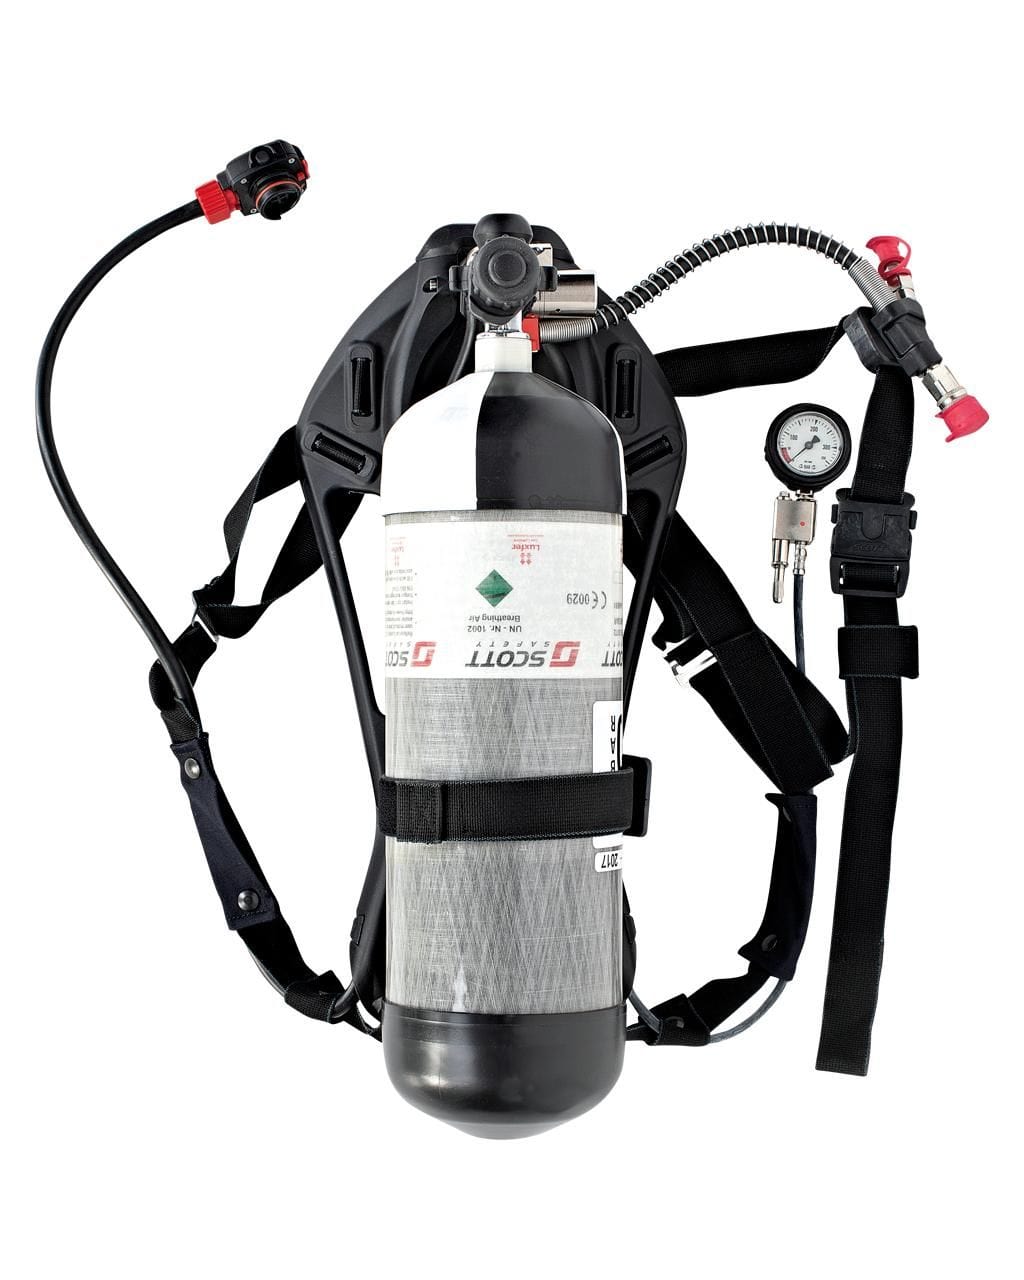 Drager X-plore Chemical Respirator With Cartridge - 5500 | Supply Master | Accra, Ghana Dust Masks & Respirators Buy Tools hardware Building materials